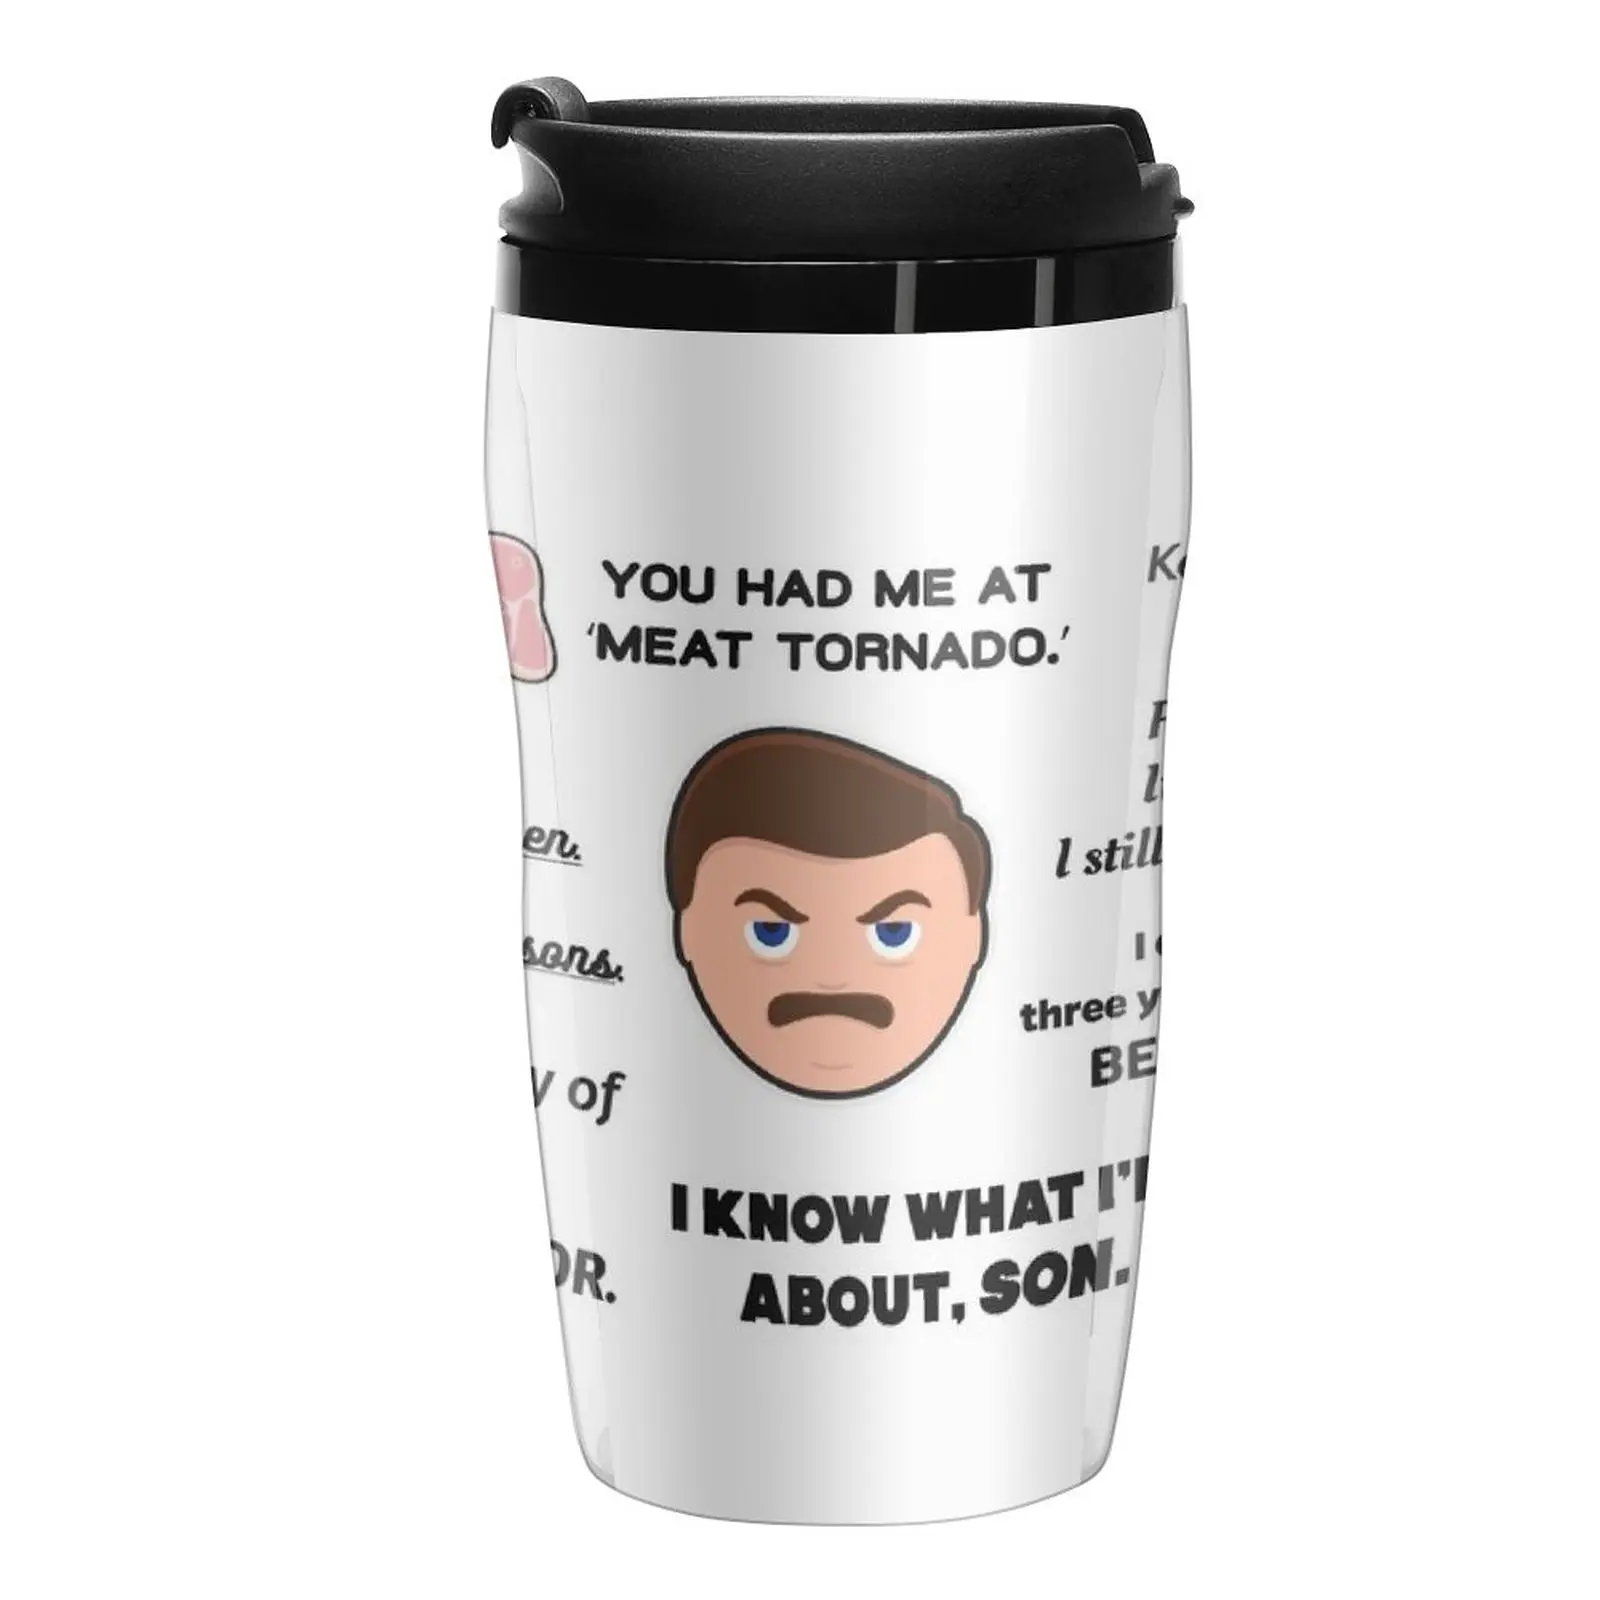 

New Ron Swanson Quotes 2 Travel Coffee Mug Latte Cup Coffee Mugs Creative Cups And Mugs